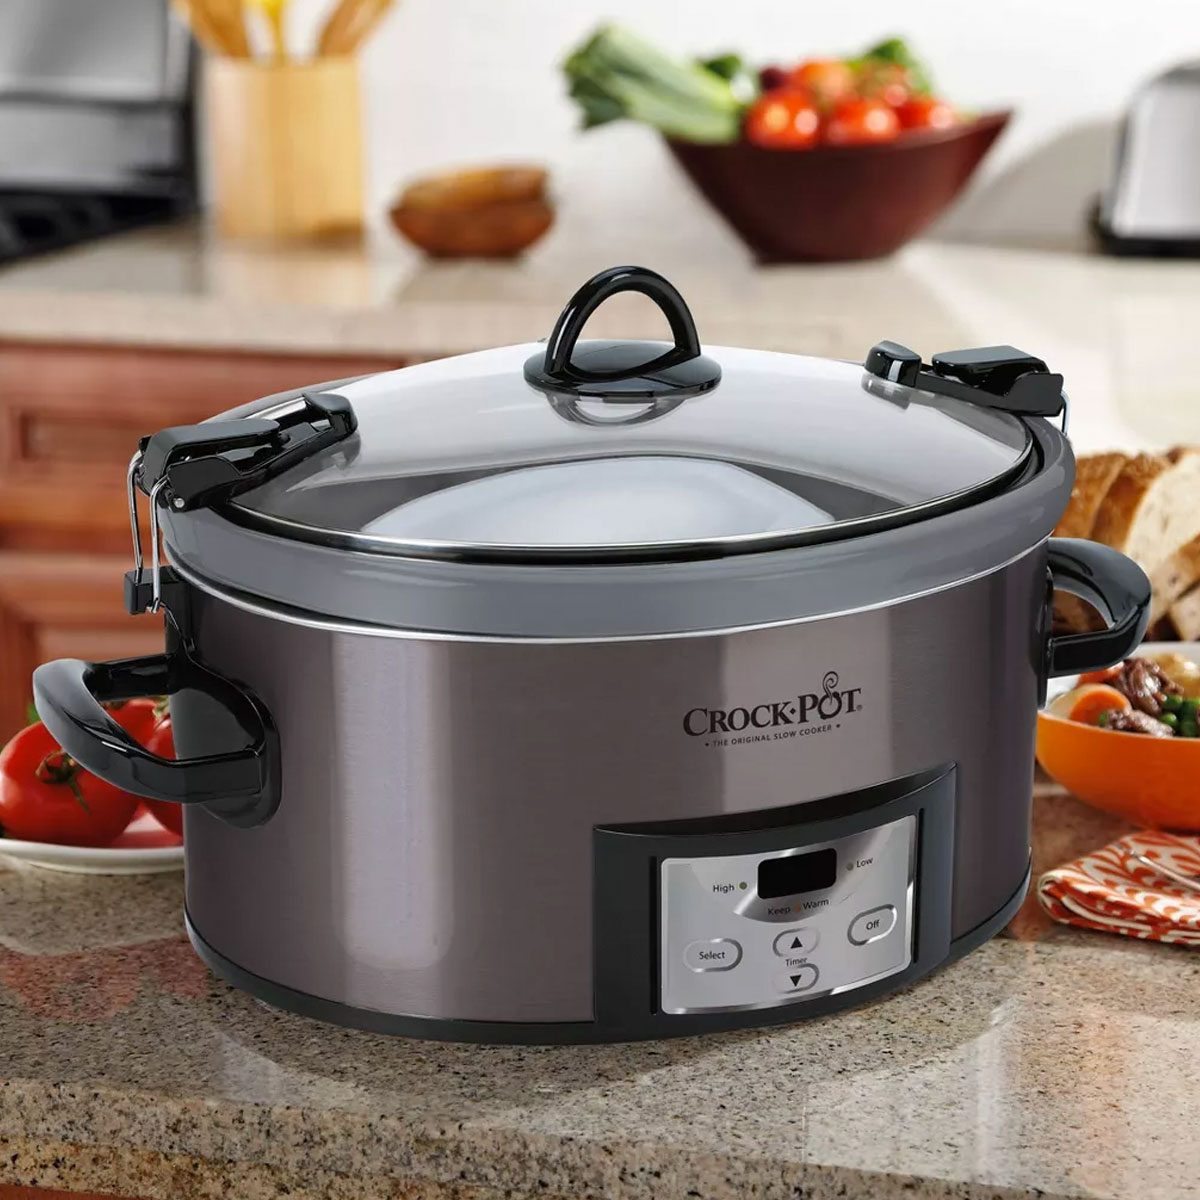 7 Kitchen Appliances That Practically Cook Dinner for You